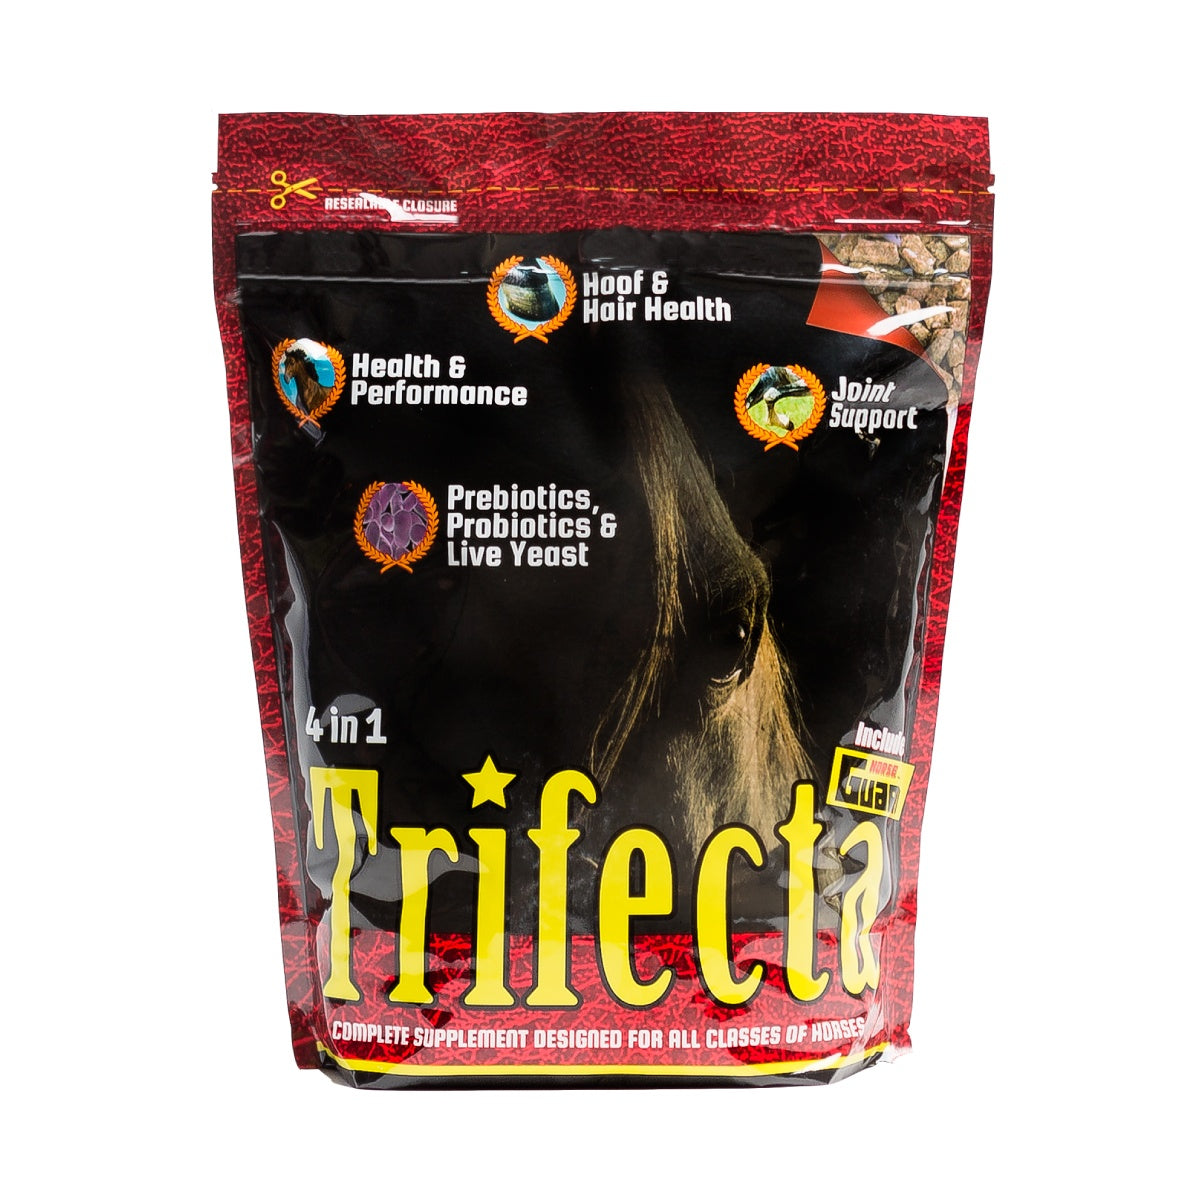 Trifecta 10lb Front Supplement by Horse Guard